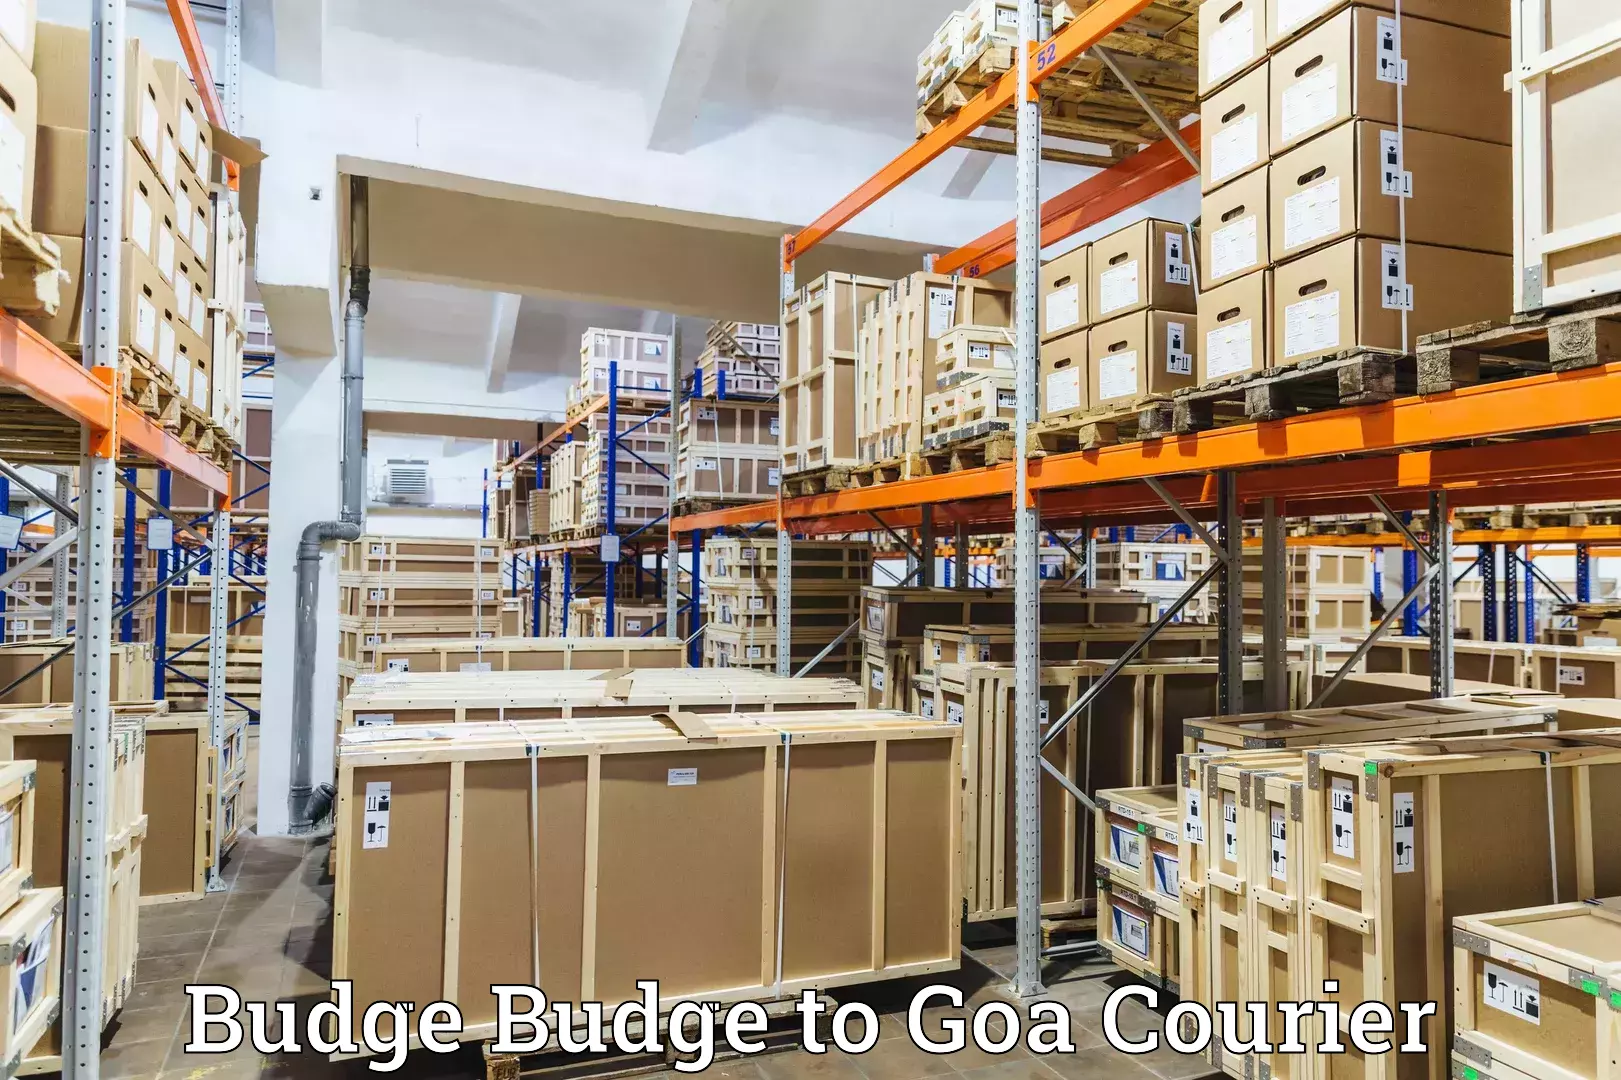 Nationwide parcel services Budge Budge to Goa